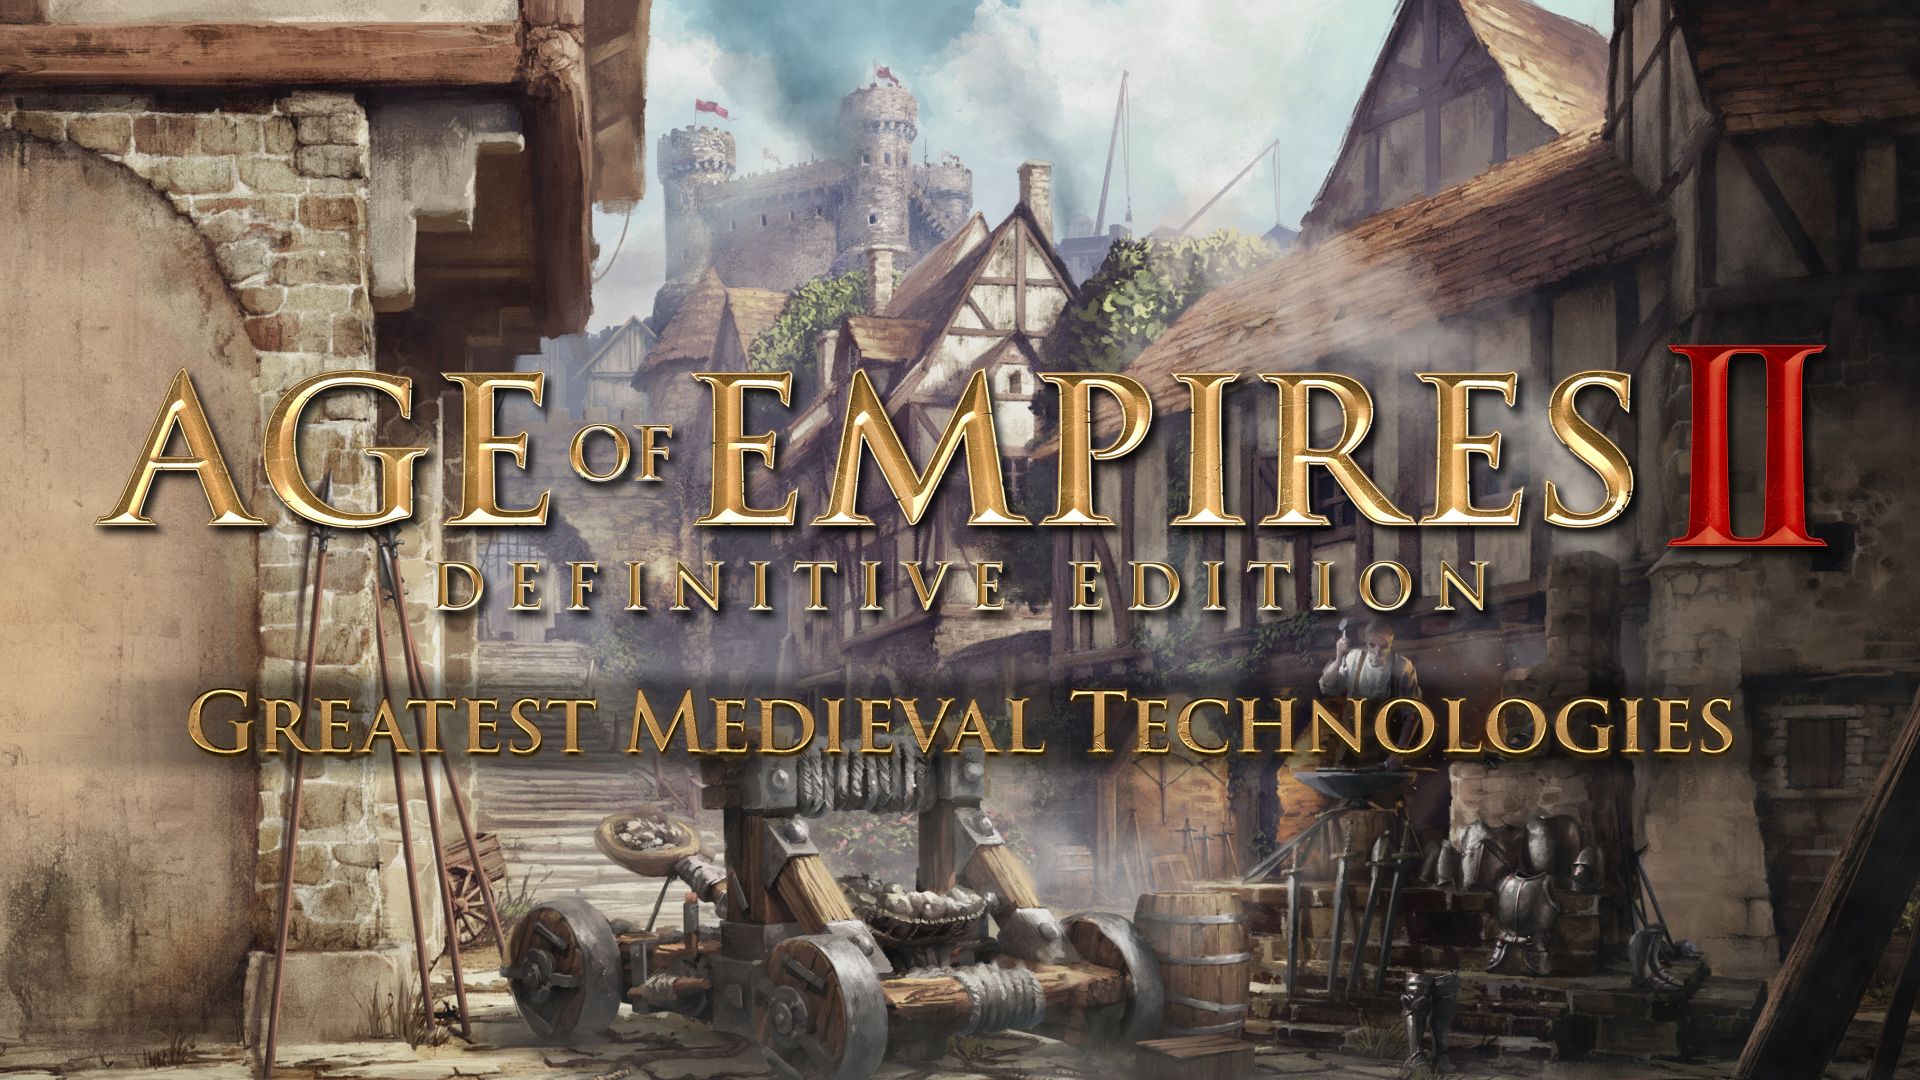 The Greatest Medieval Technologies Event! of Empires